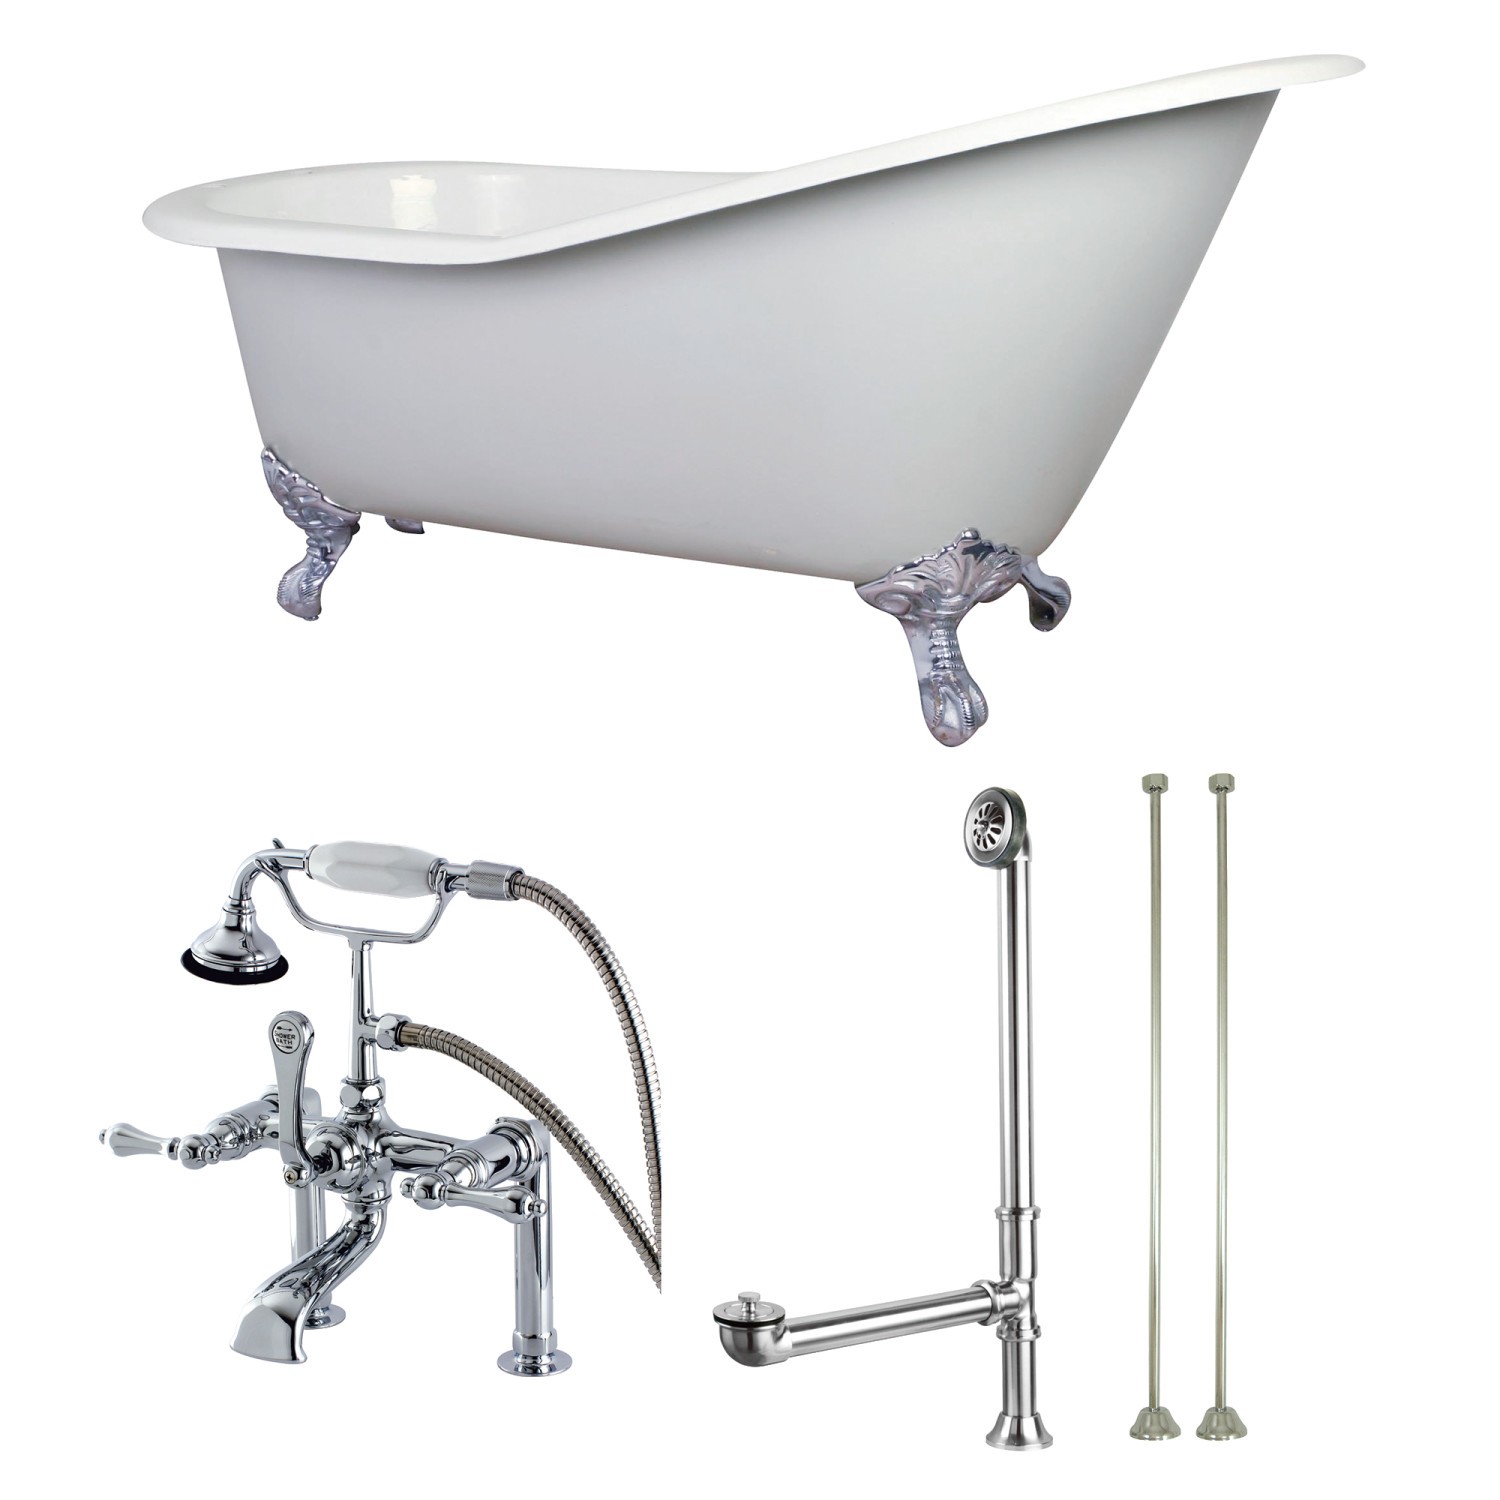 KINGSTON BRASS KCT7D653129C1 AQUA EDEN 62-INCH CLAWFOOT TUB WITH FAUCET DRAIN AND LINES COMBO